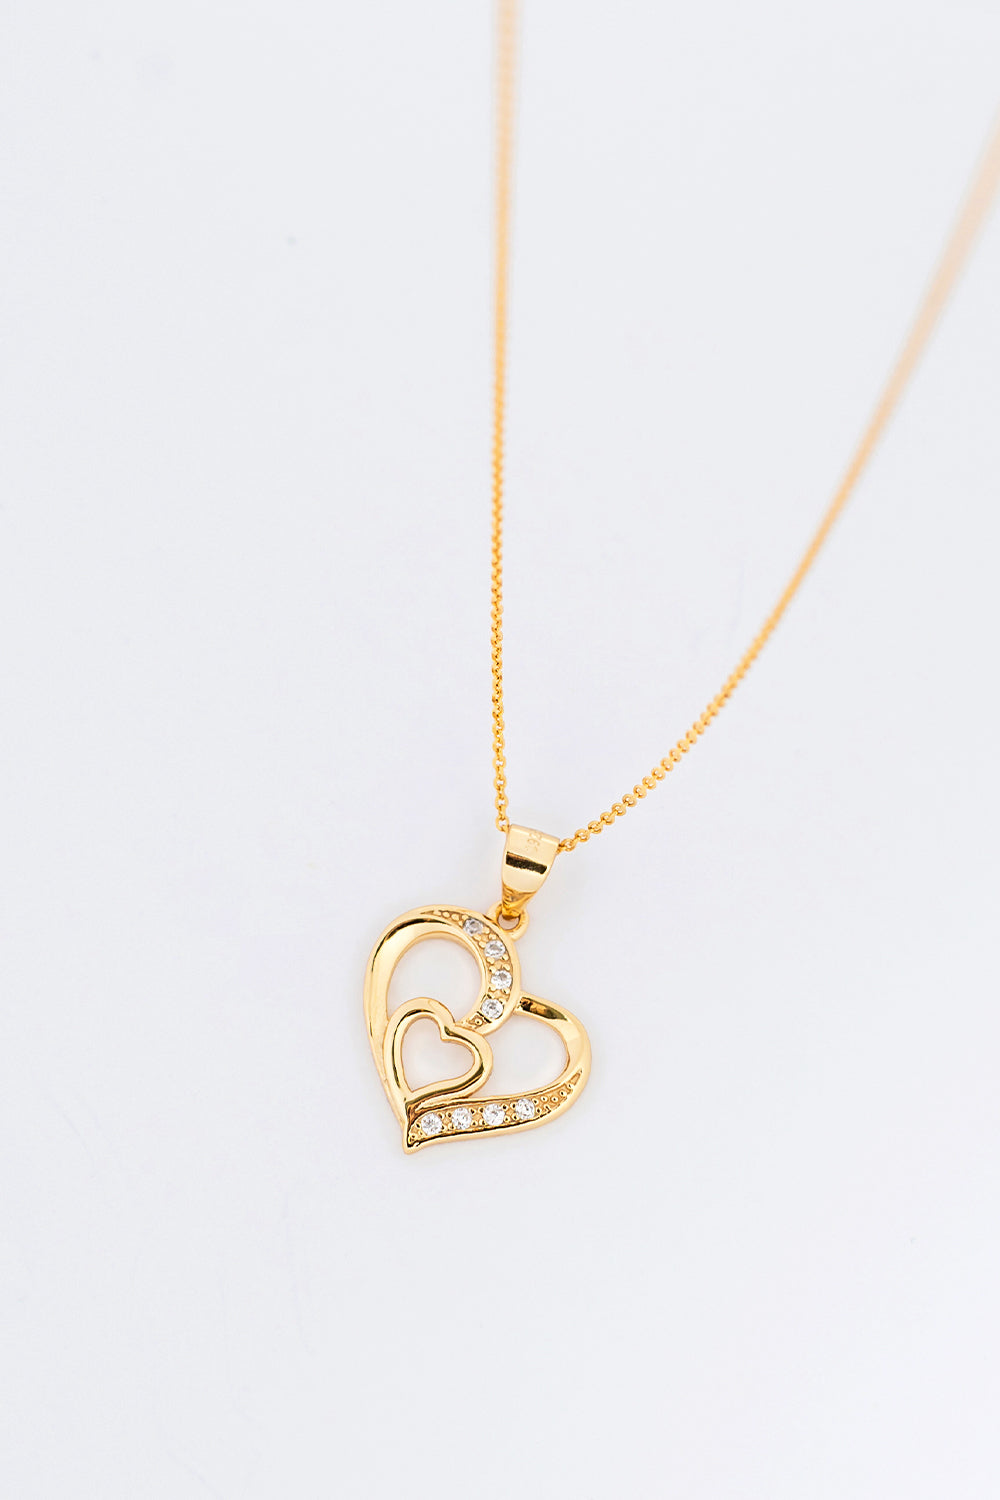 Gold-plated necklace SHINY HEART 925 silver